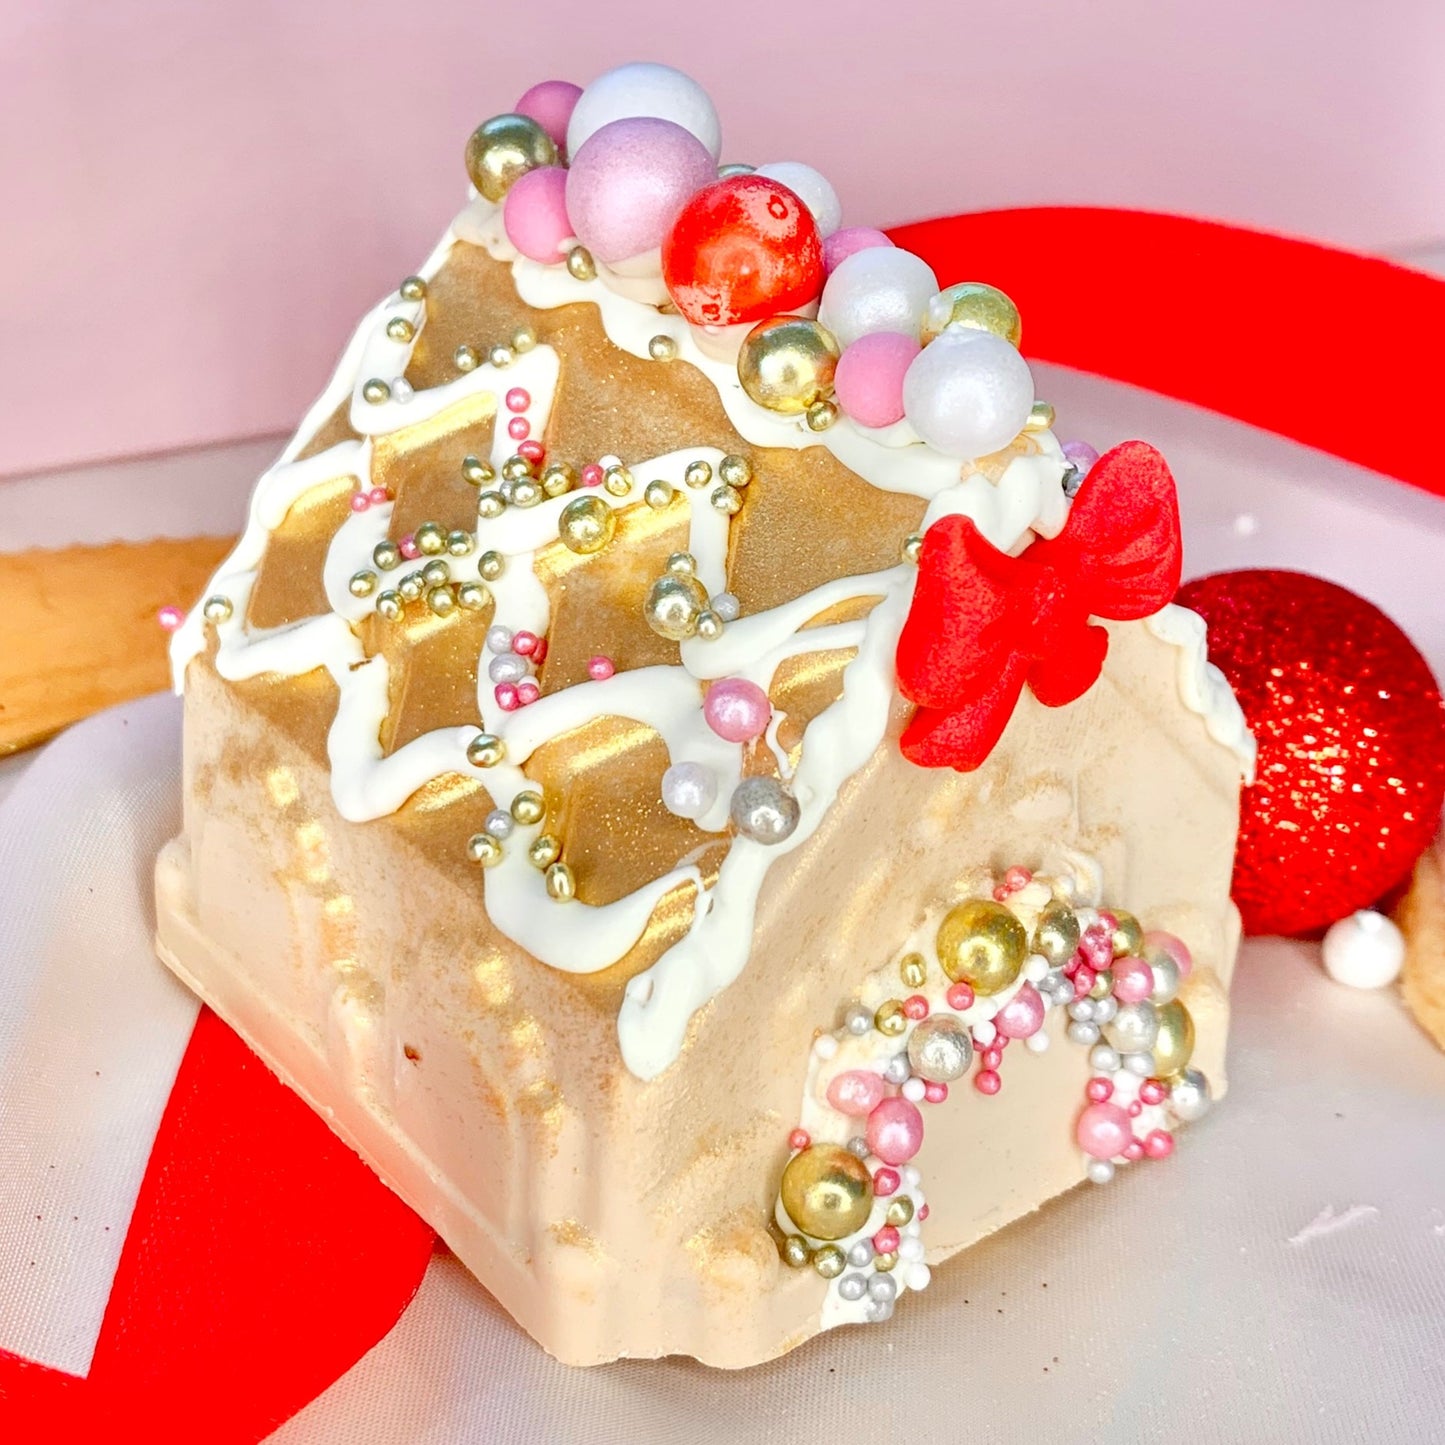 GINGERBREAD HOUSE MOULD